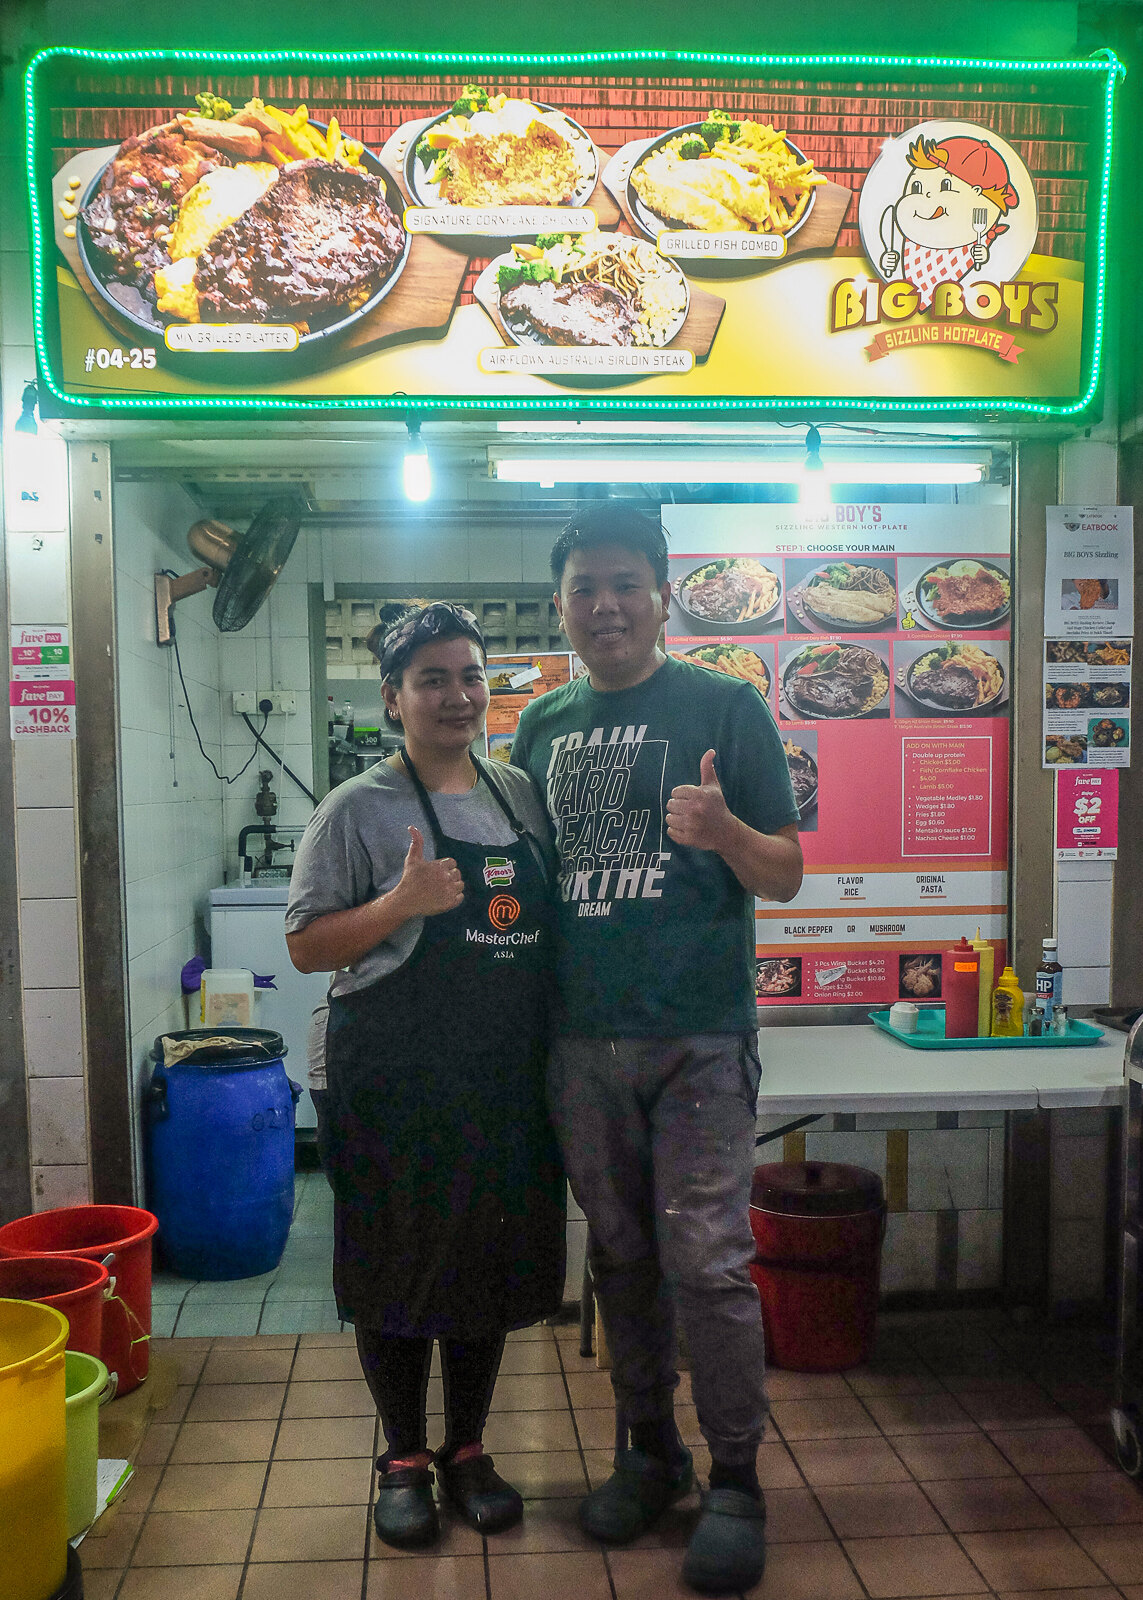 Big Boys Sizzling Hotplate Shopfront with Owners